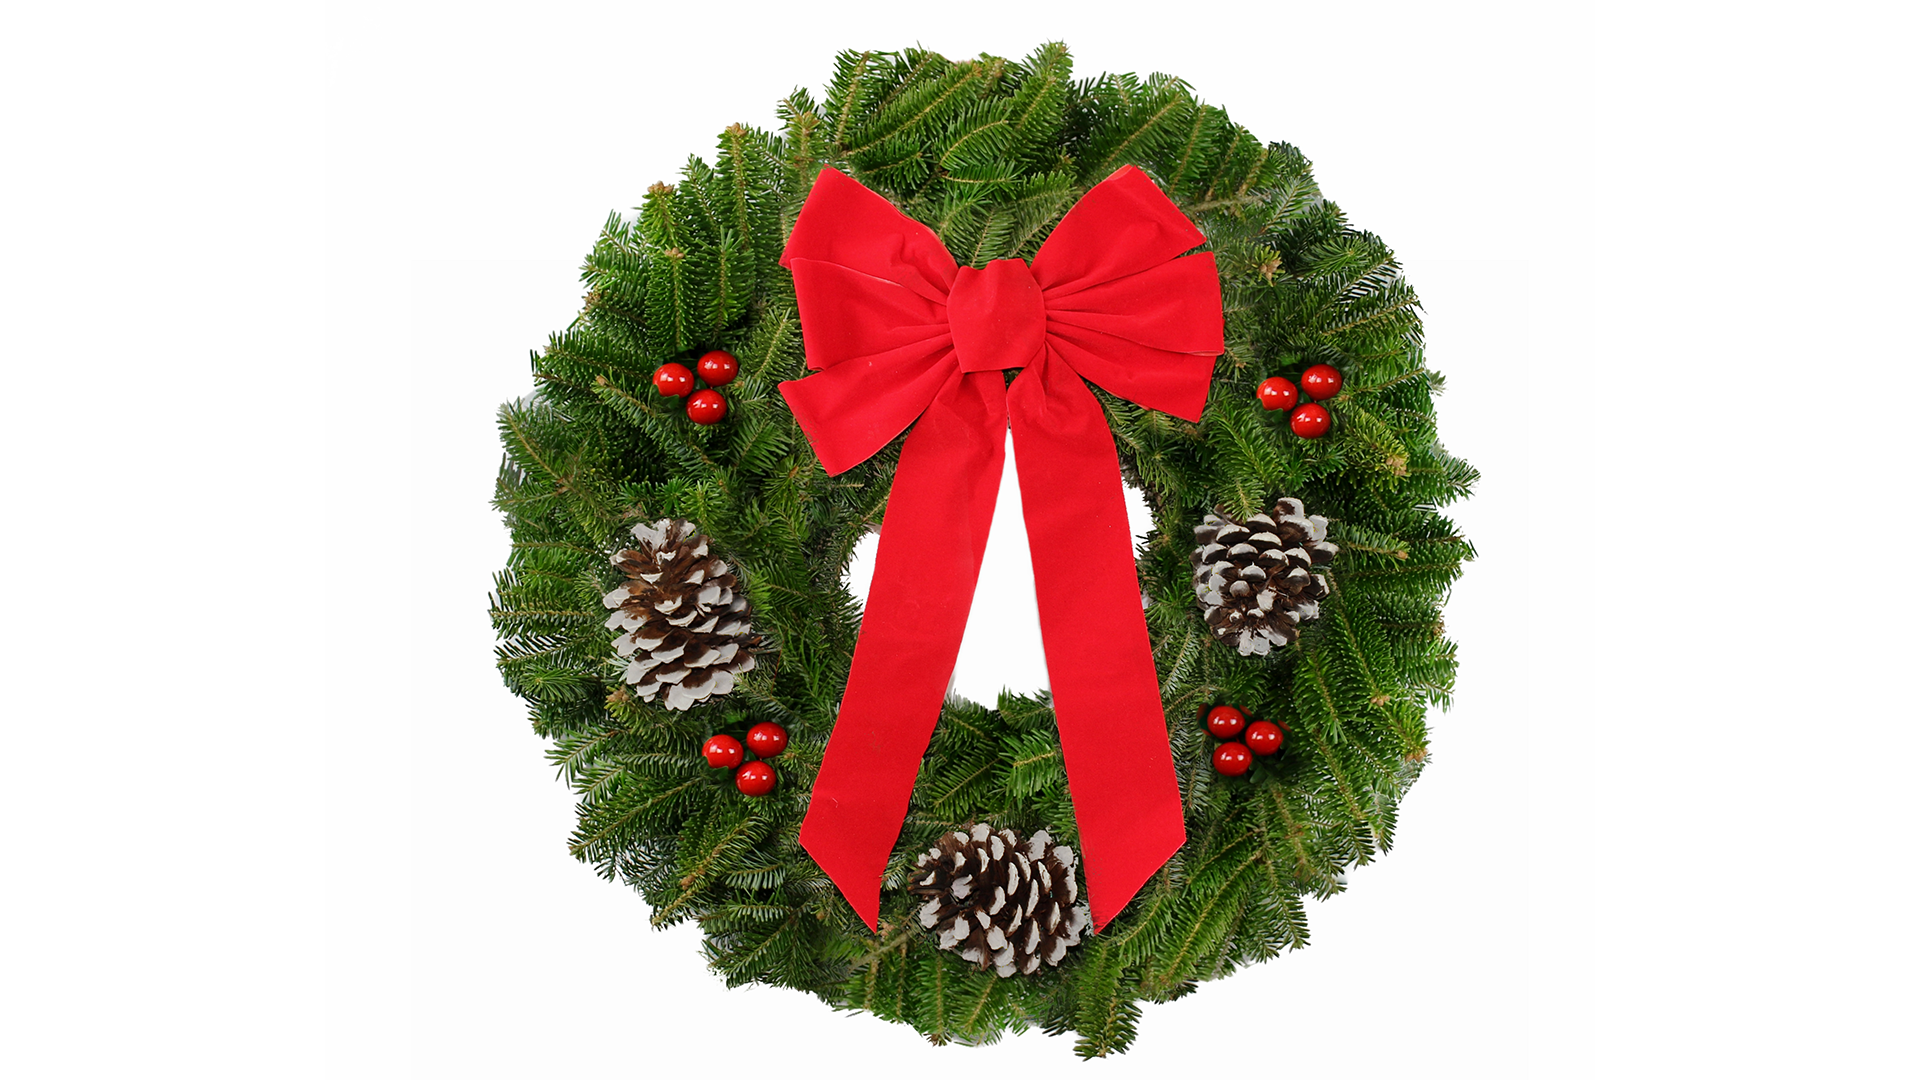 22 inch Fraser Fir Wholesale Christmas Wreath, Decorated